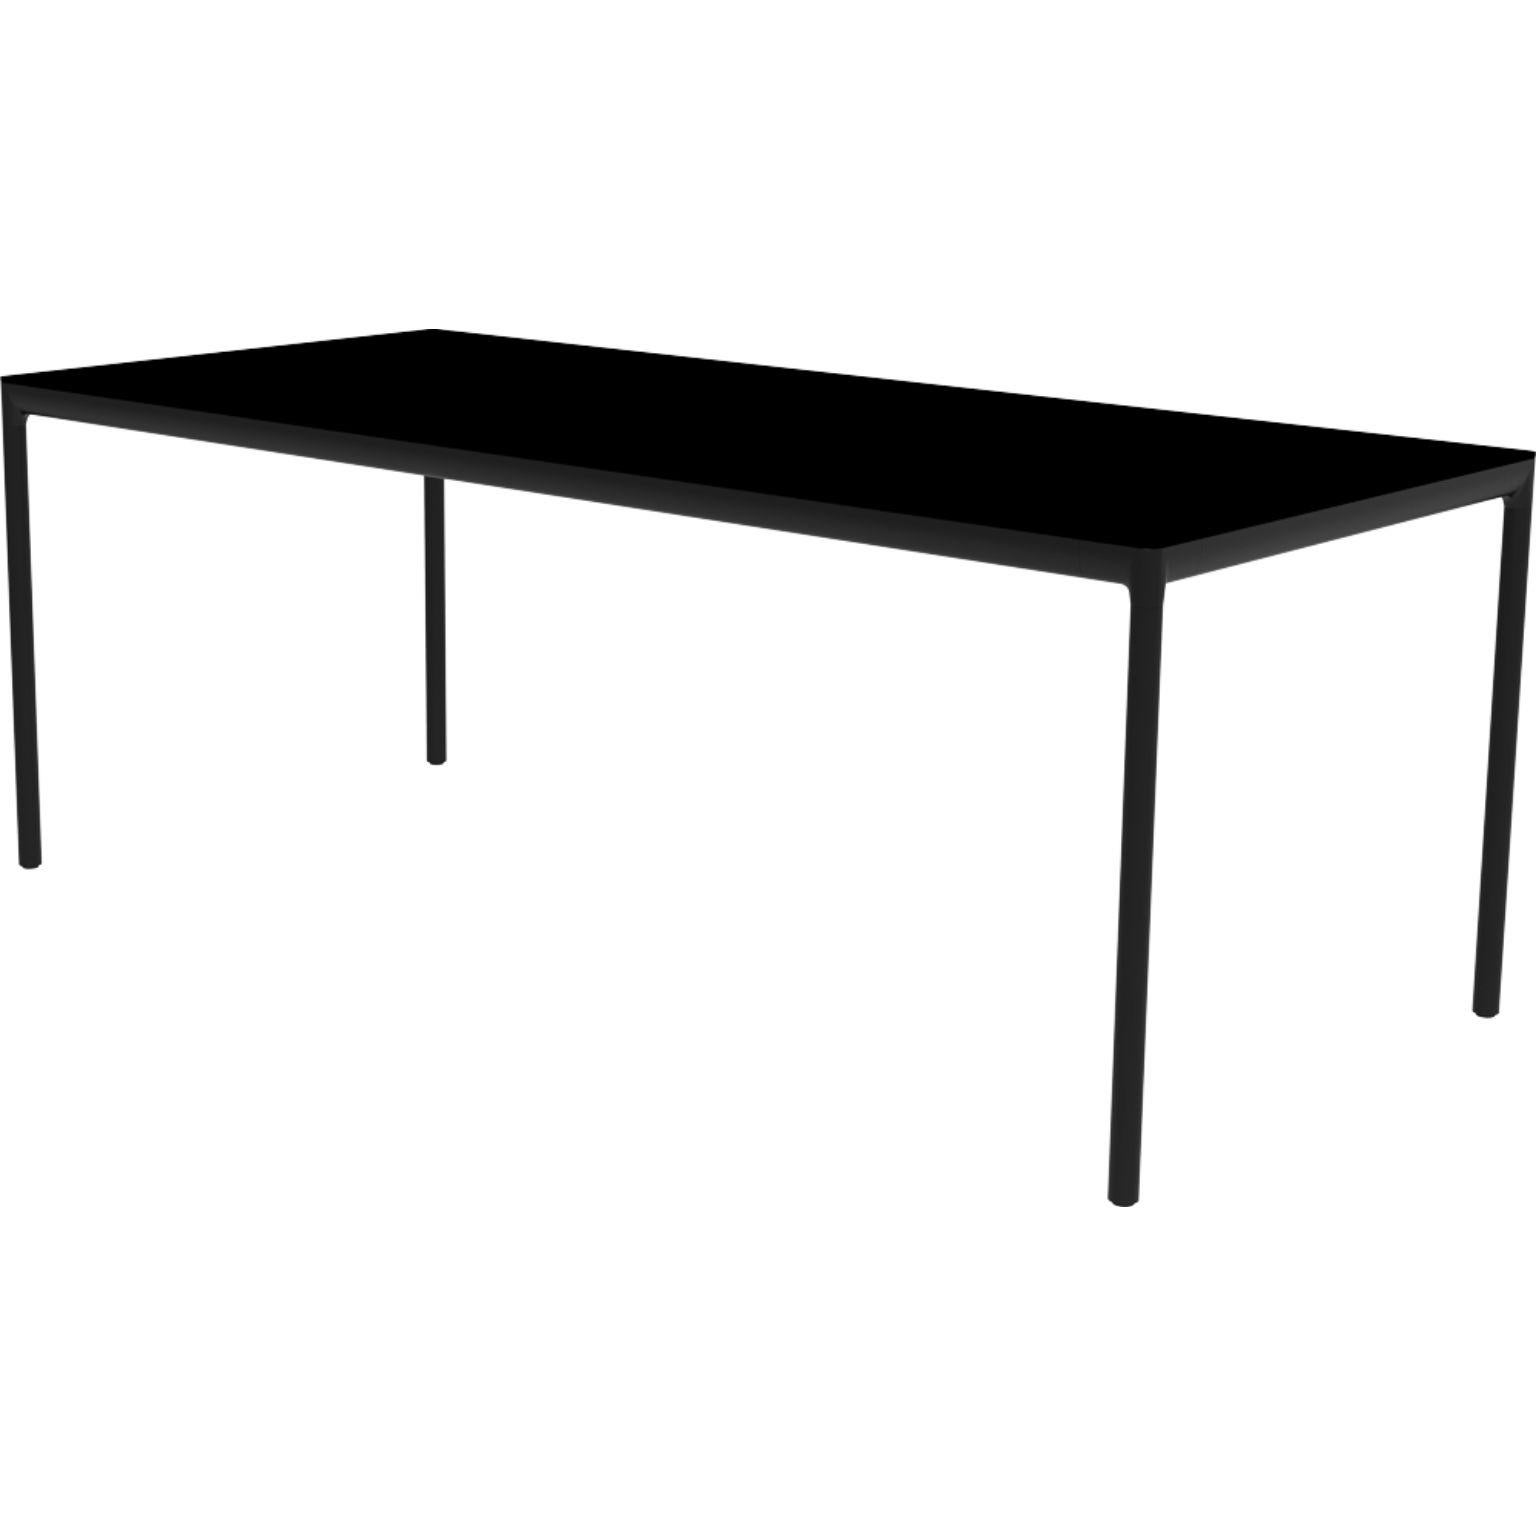 Ribbons black 200 coffee table by MOWEE
Dimensions: D90 x W200 x H75 cm.
Material: Aluminum and HPL top.
Weight: 25 kg.
Also available in different colors and finishes. (HPL Black Edge or Neolith top). 

An unmistakable collection for its